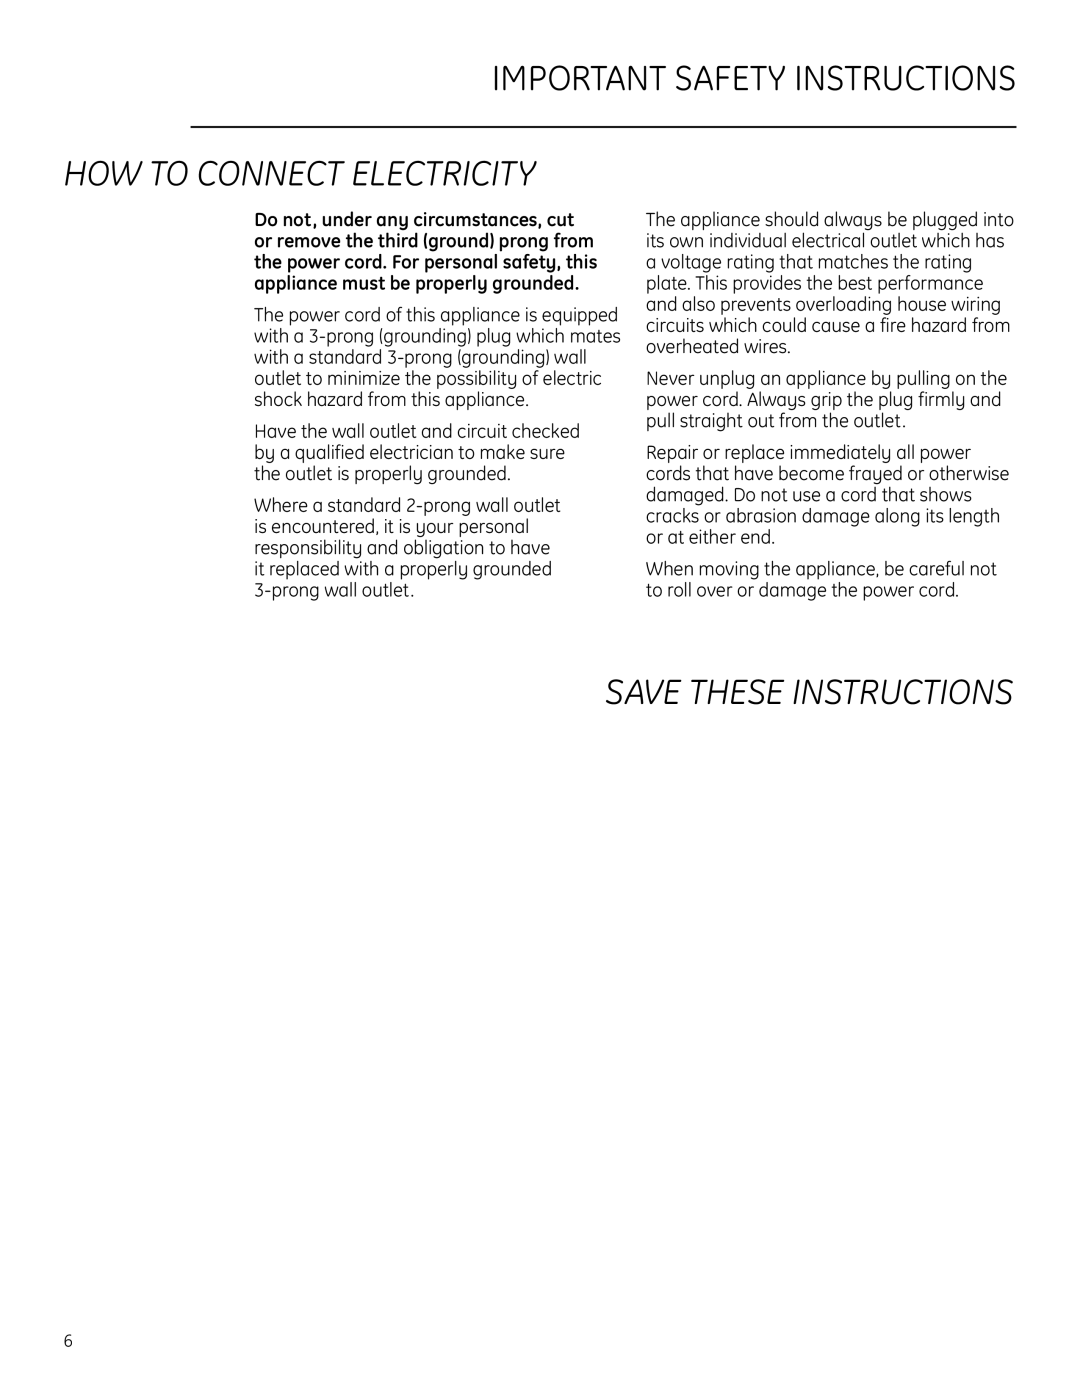 GE Monogram ZDWR240, ZDWI240 owner manual How To Connect Electricity, Important Safety Instructions, Save These Instructions 